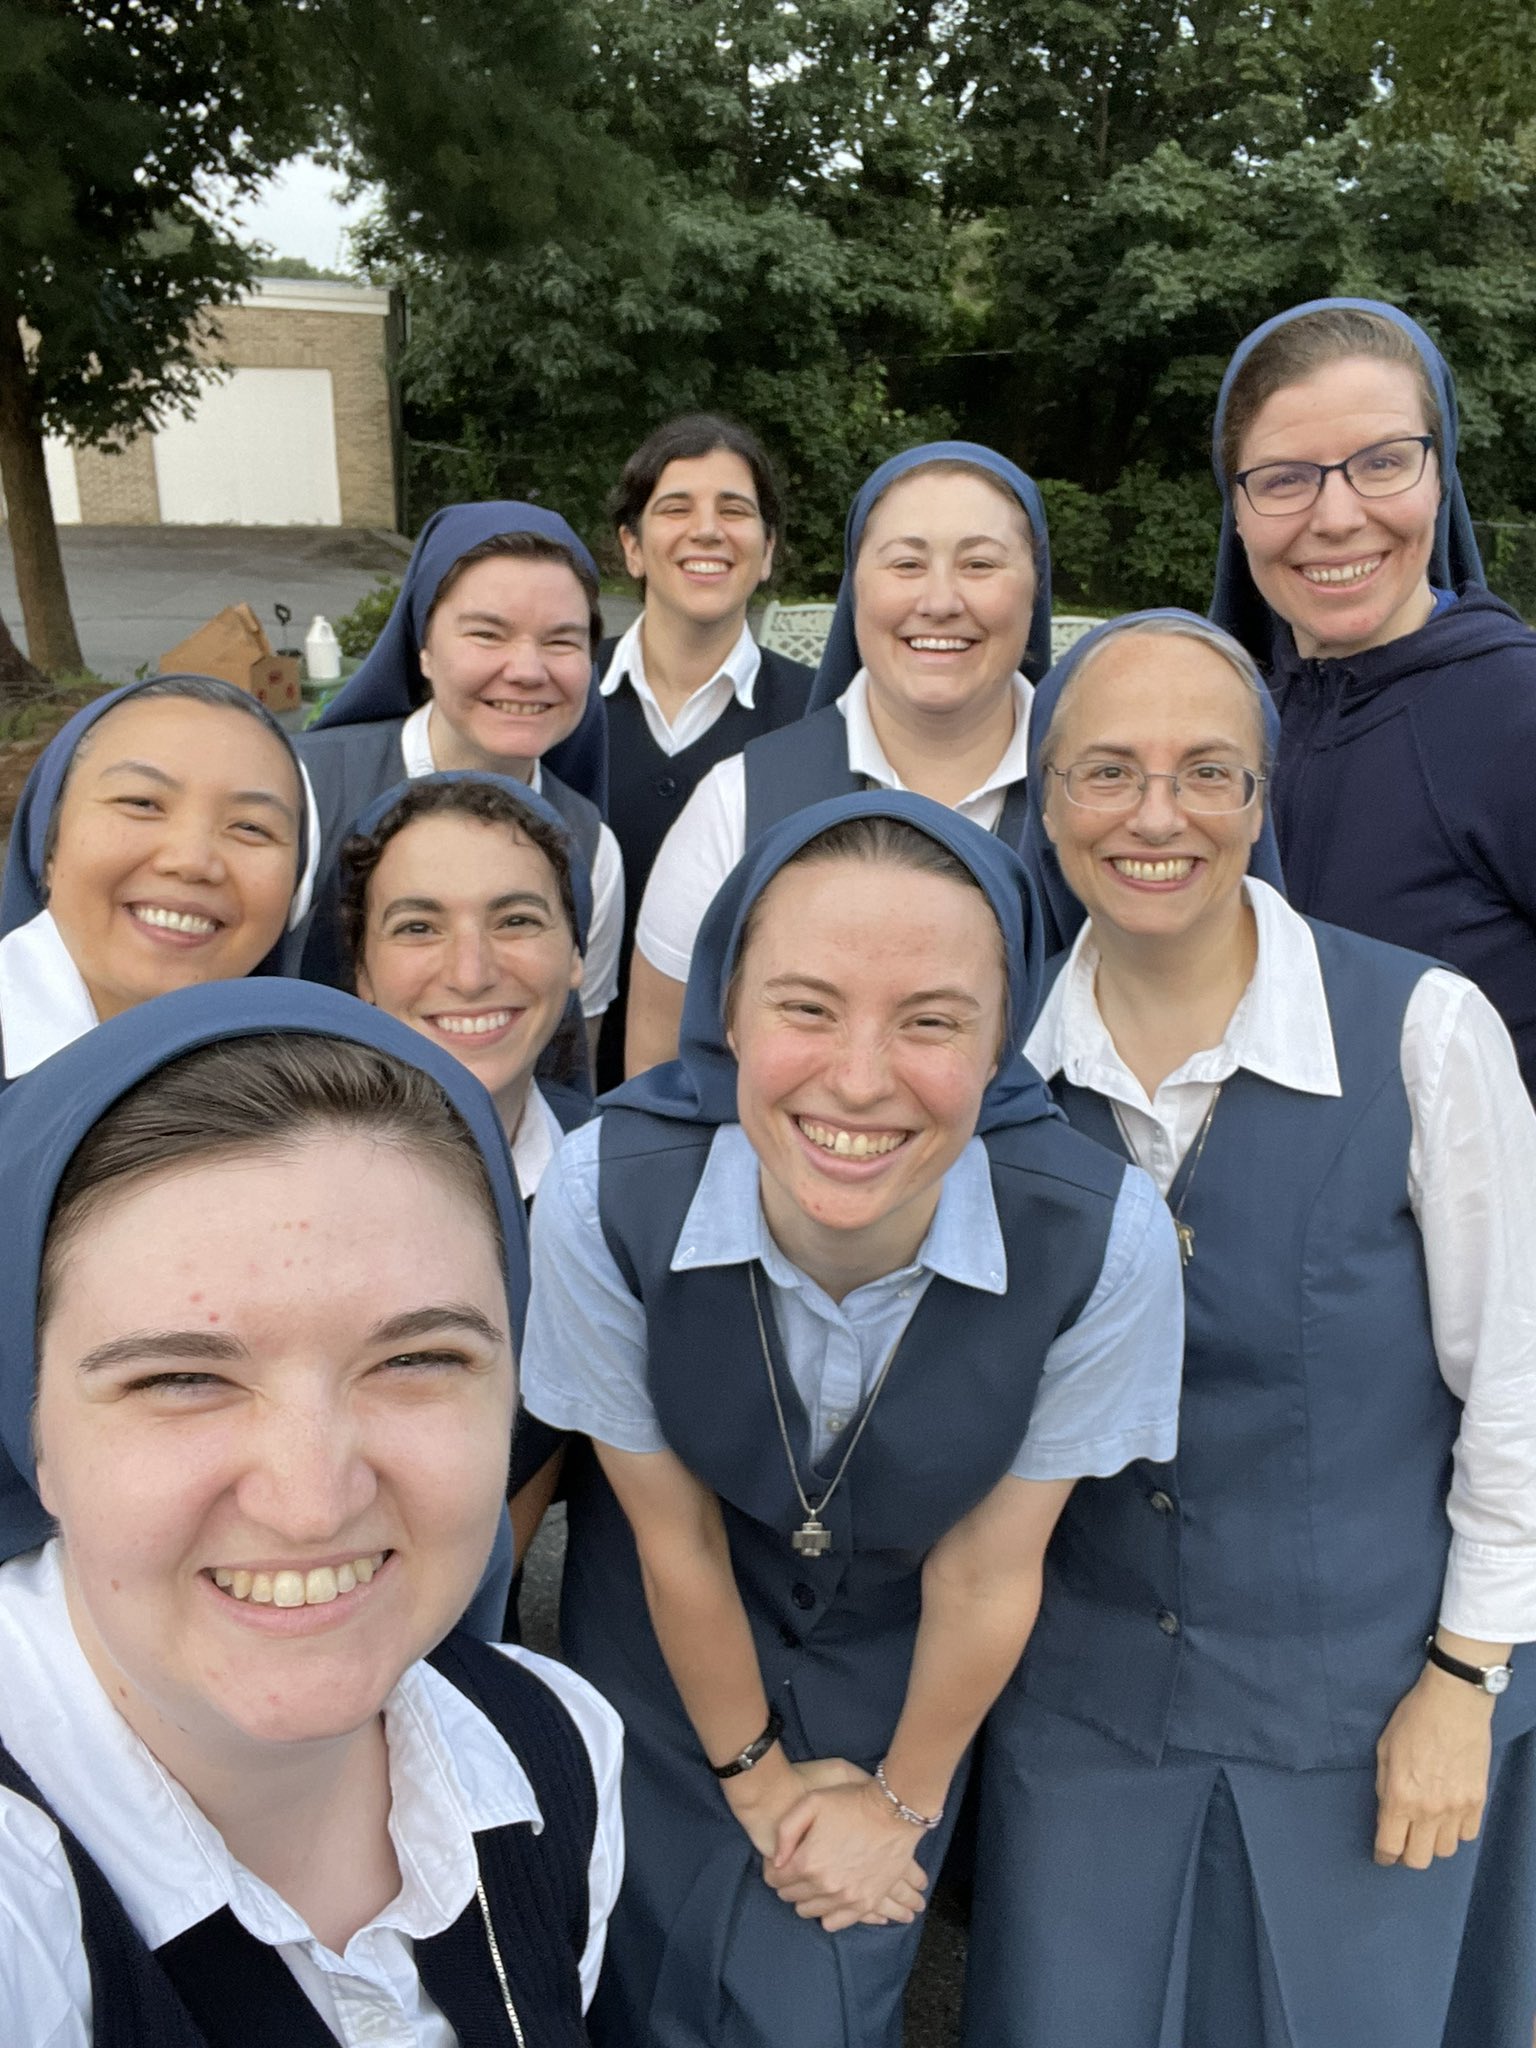 Sister Bethany, fsp na Twitterze: „Friends, rejoice with me! I have two  newly professed little Sisters!!! Sr. Orianne Pietra René and Sr. Allison  Regina (@sister_allison). This weekend has been a beautiful whirlwind